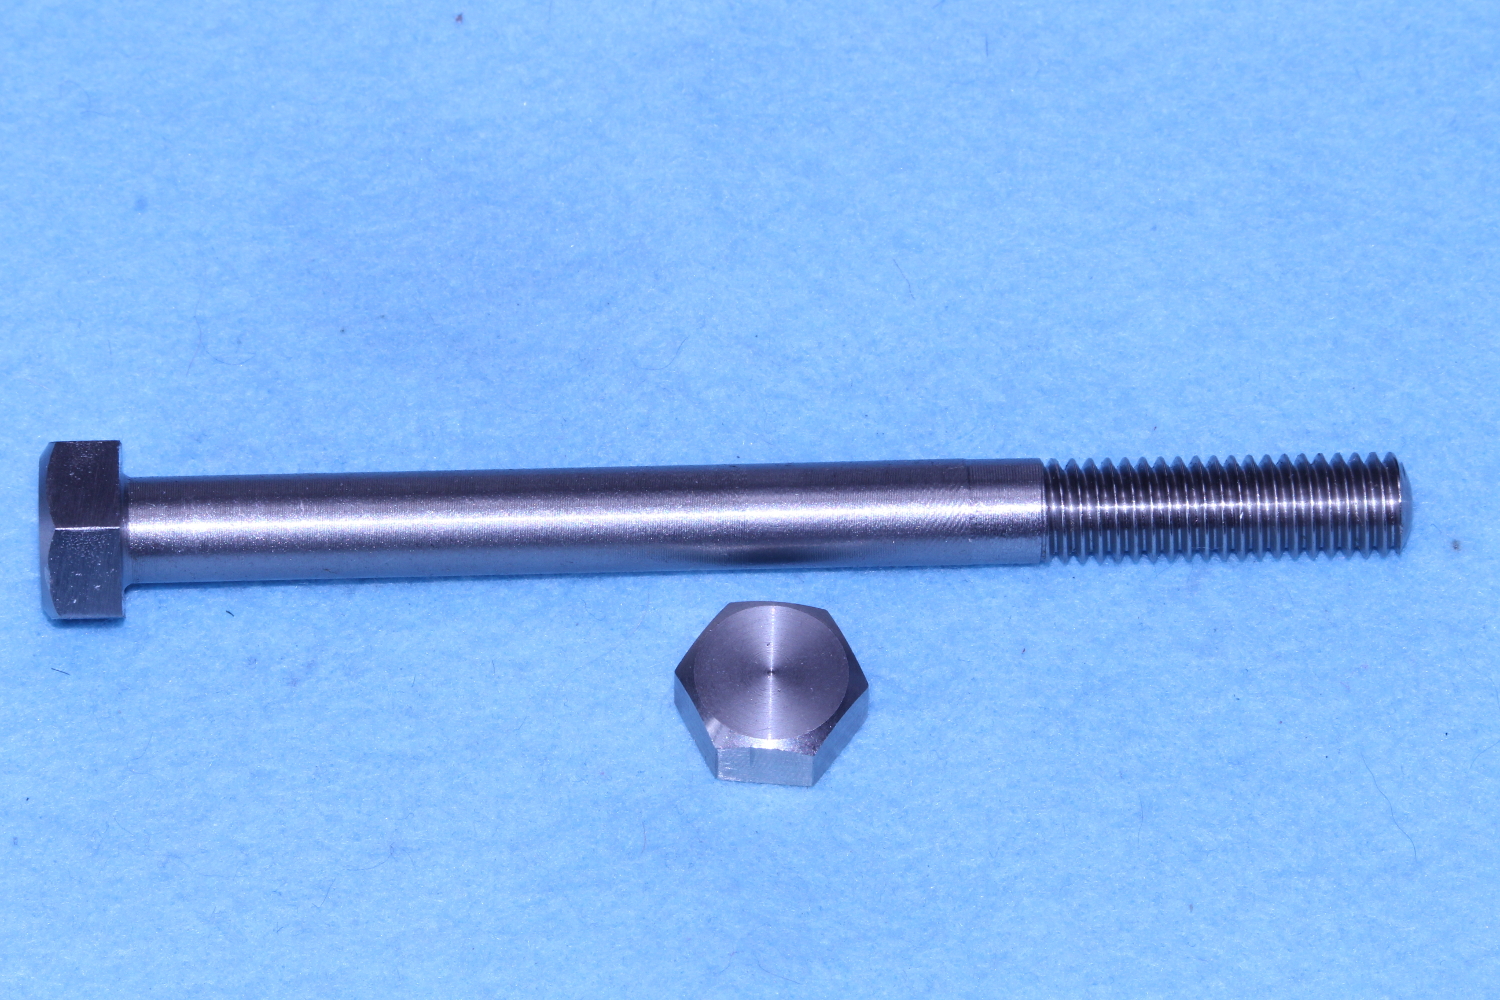 Whitworth 3/8" x 2-1/2" stainless steel  bolts x 4 